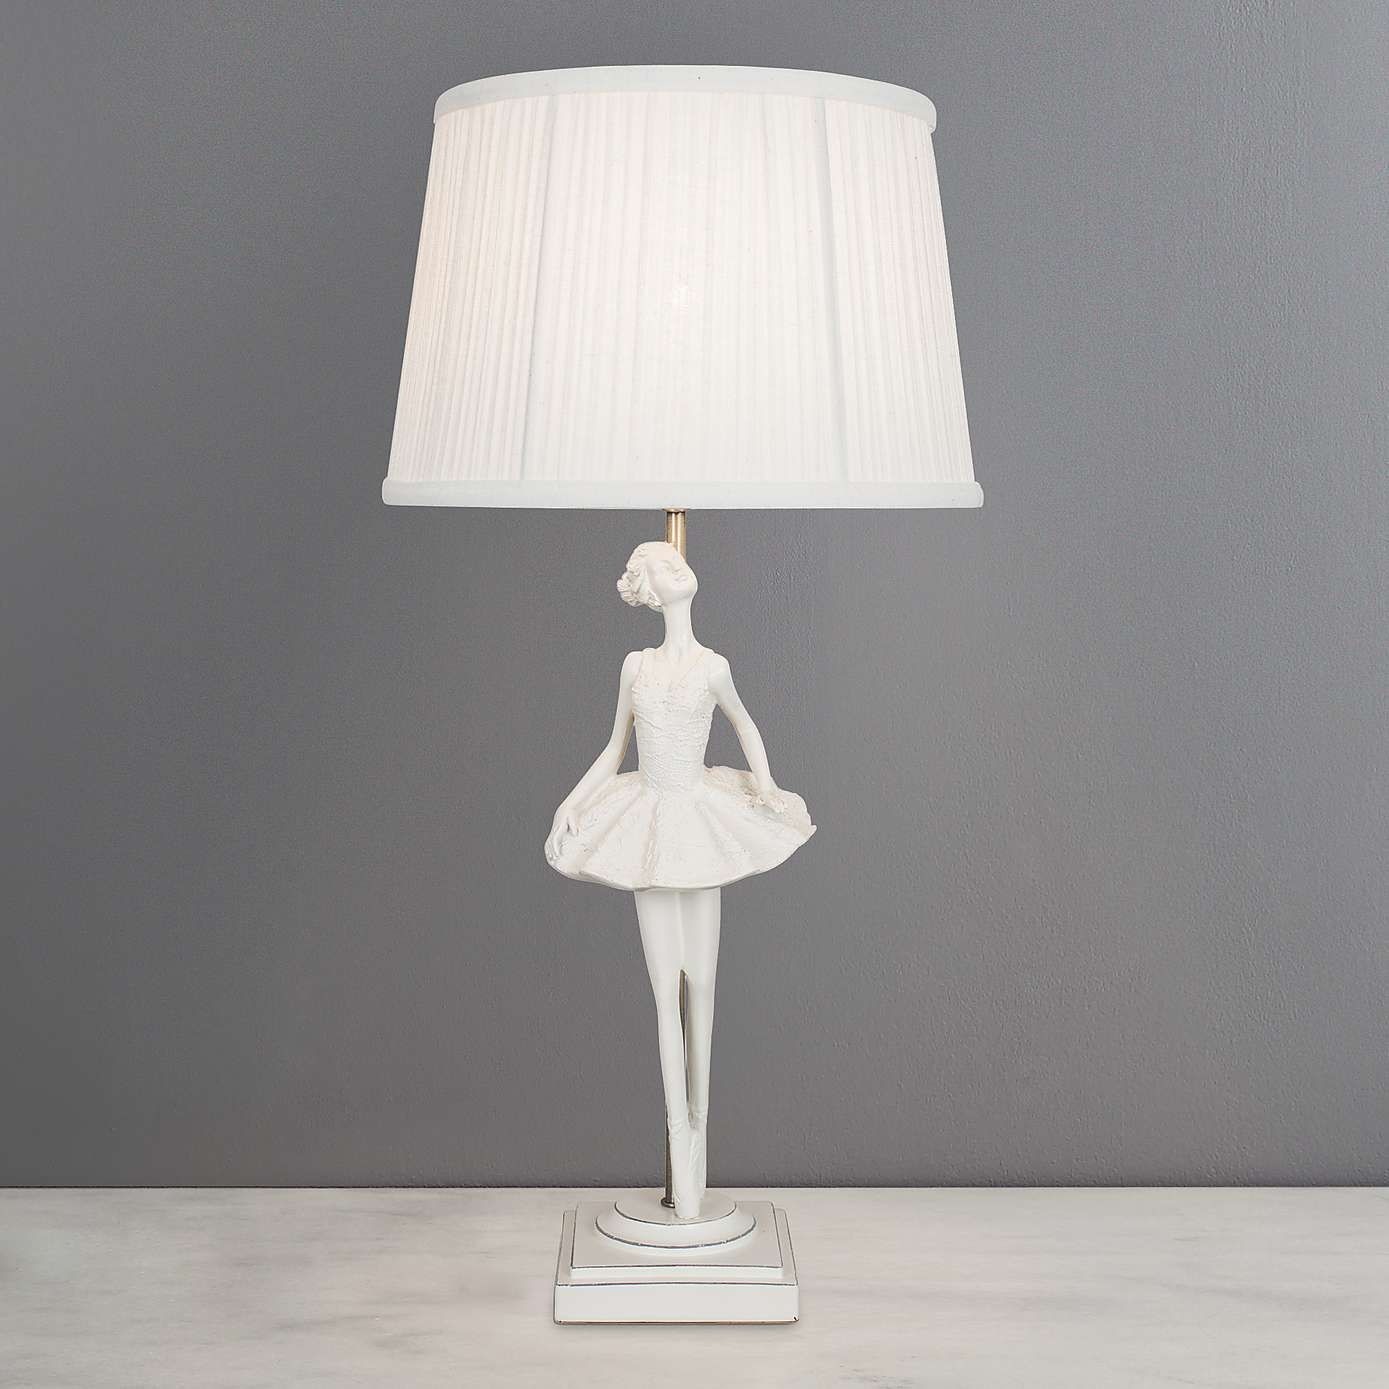 Ballerina ivory table lamp with images lamp